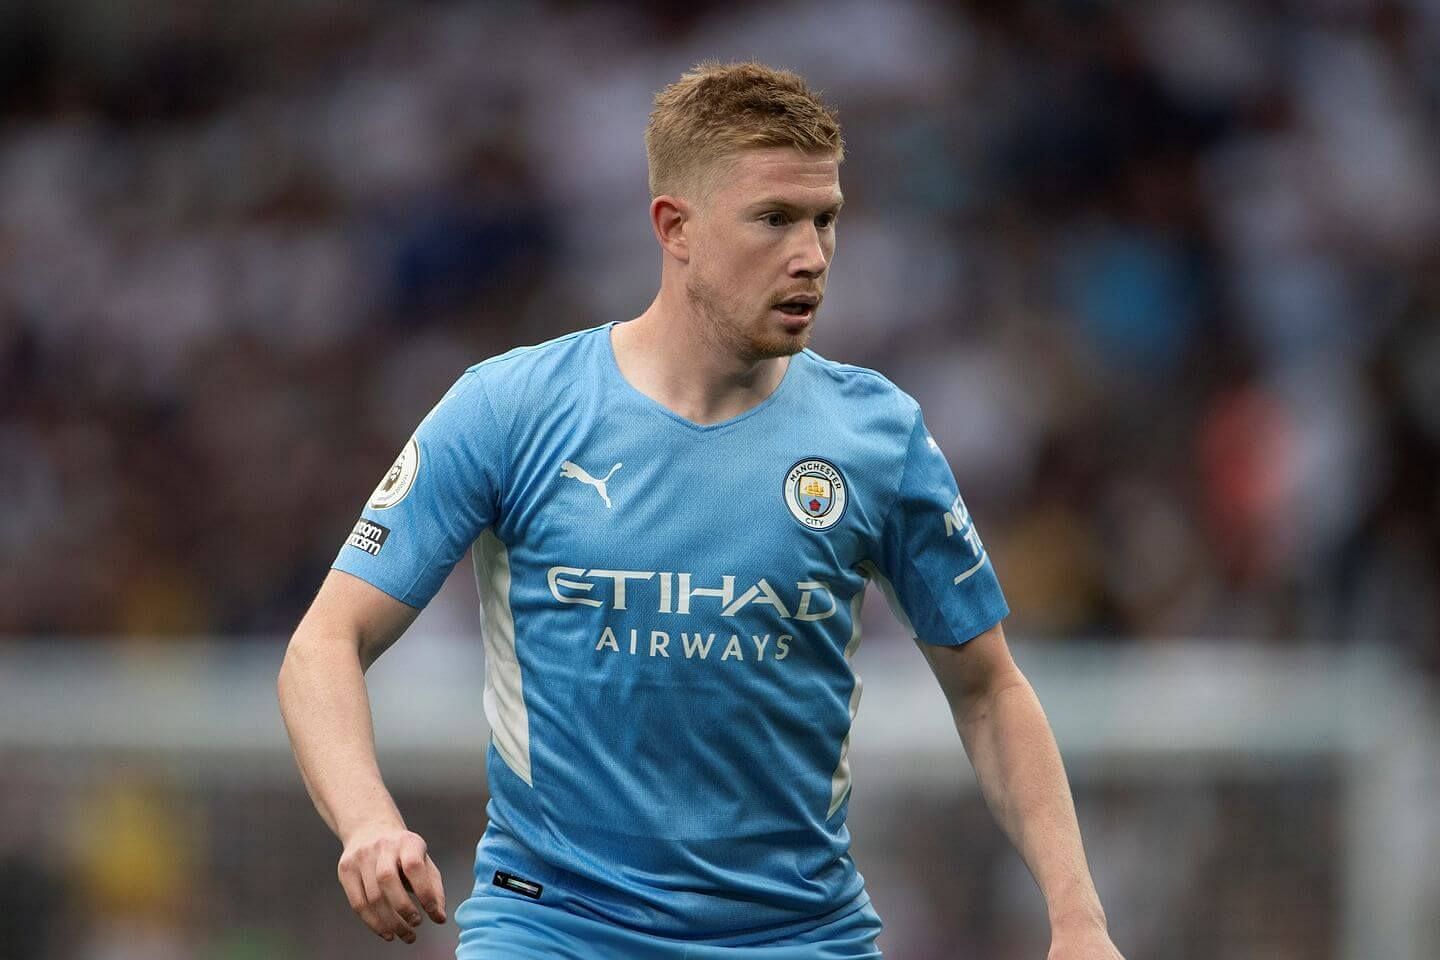 De Bruyne&#039;s 2021/22 season has been riddled with injuries